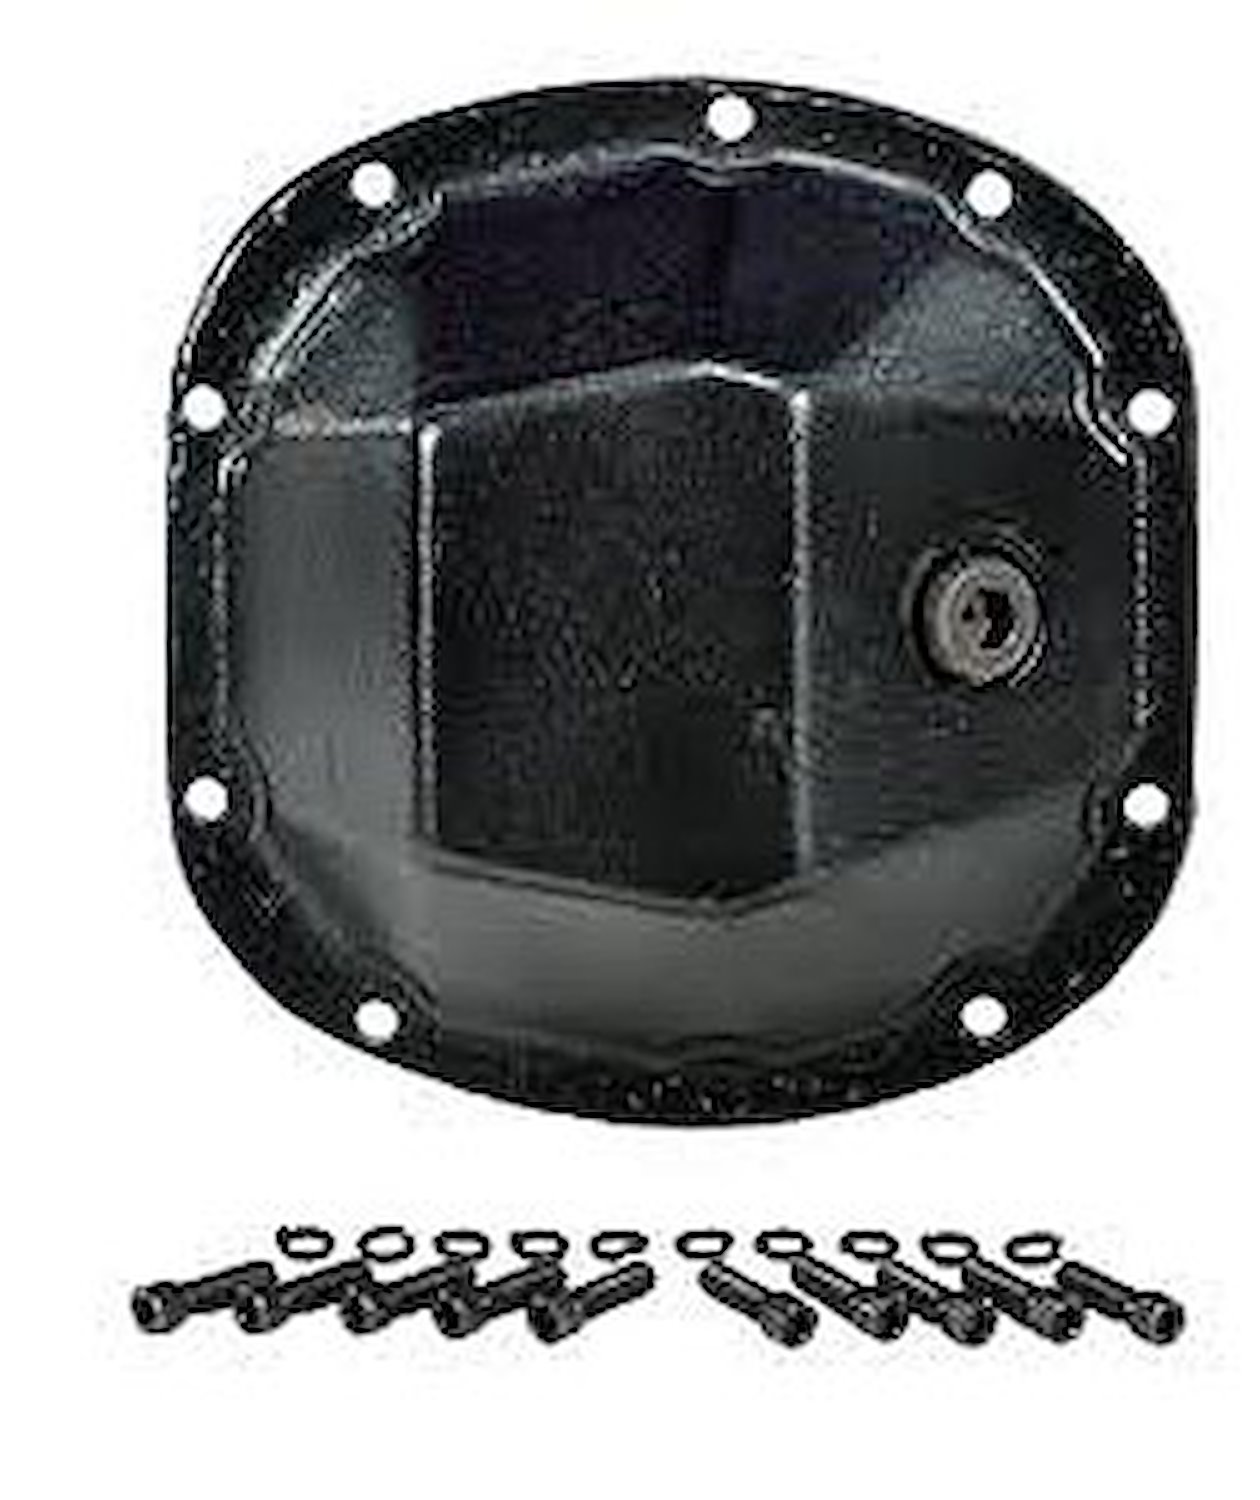 Heavy Duty Differential Cover Chrysler Axle with 9.25" Gear